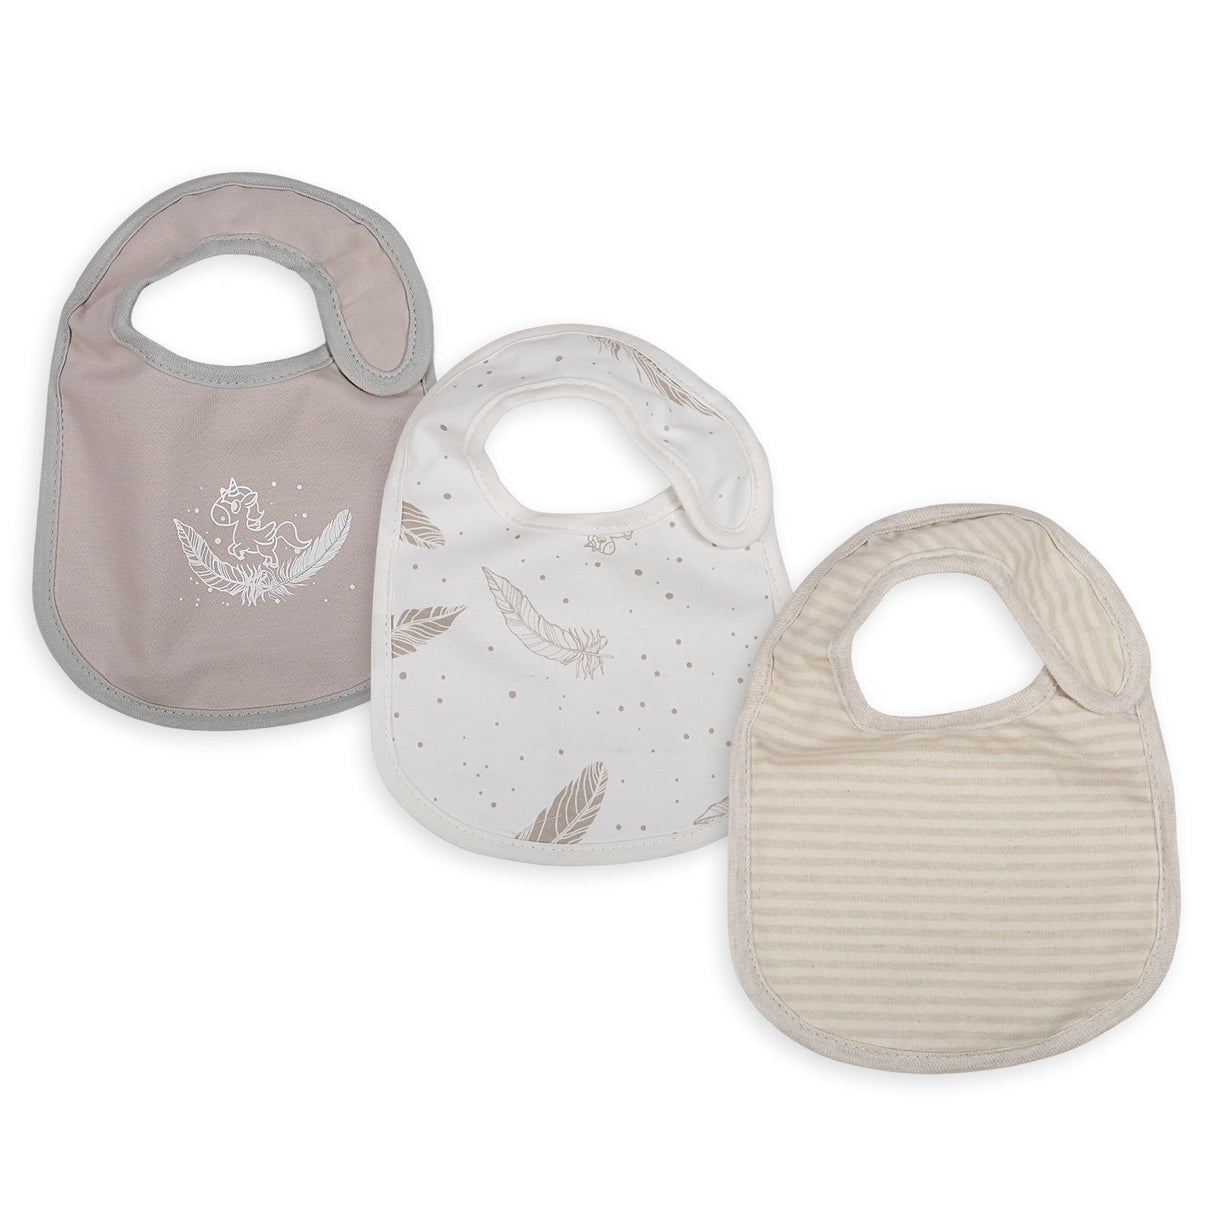 Soft And Durable Pack Of 3 Feeding Bibs